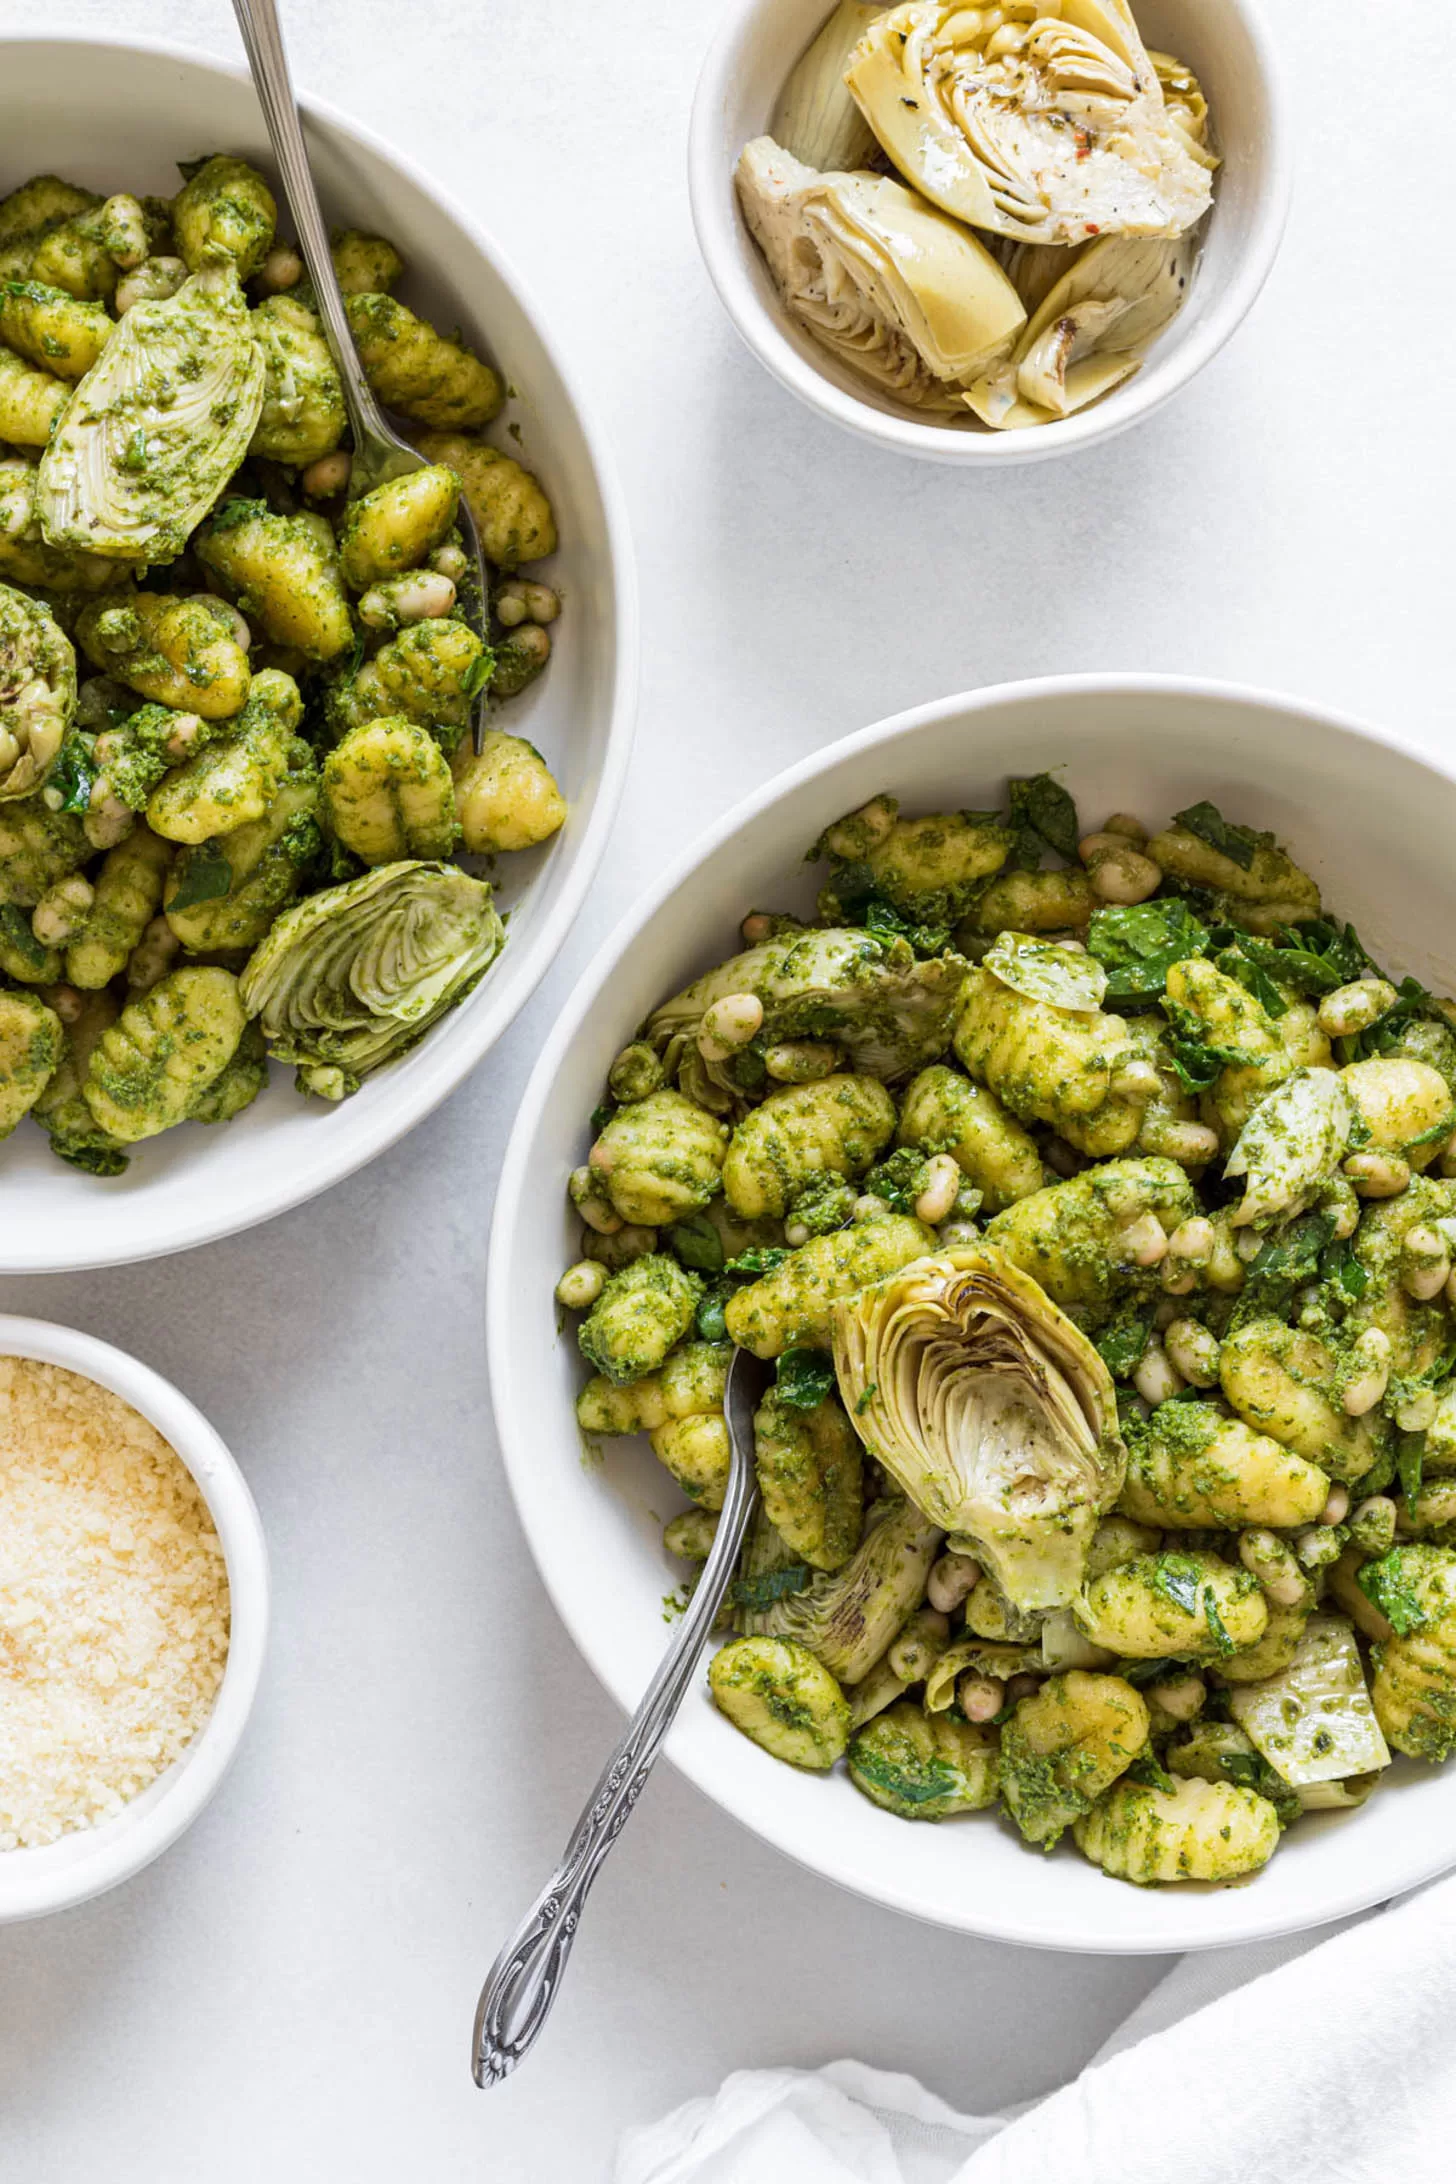 Pesto gnocchi in two serving bowls.